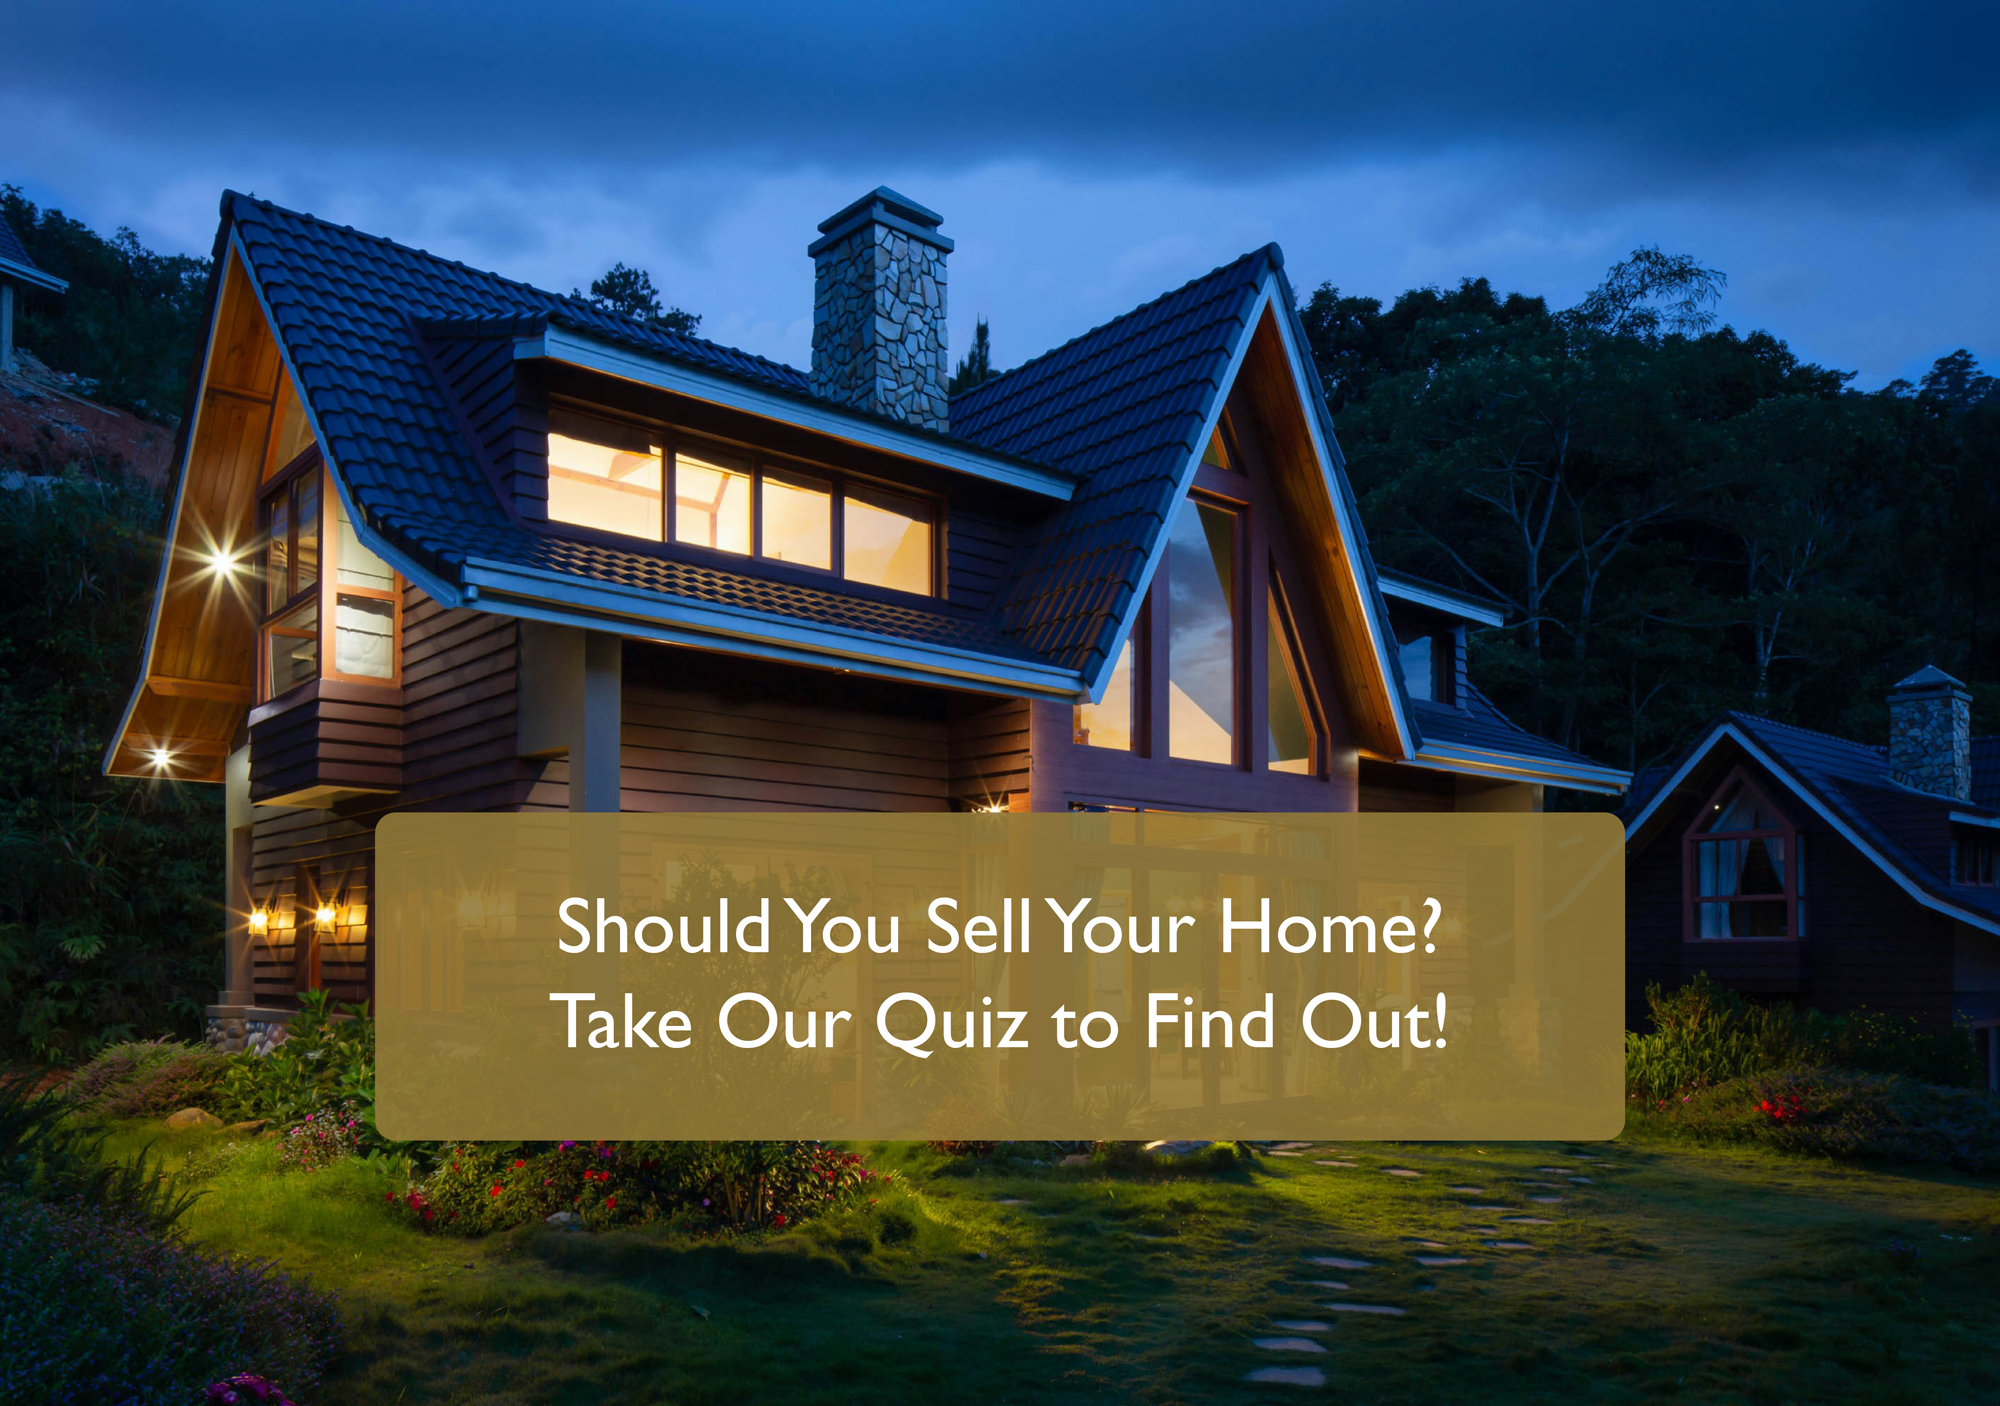 Should You Sell Your Home? Take Our Quiz to Find Out!